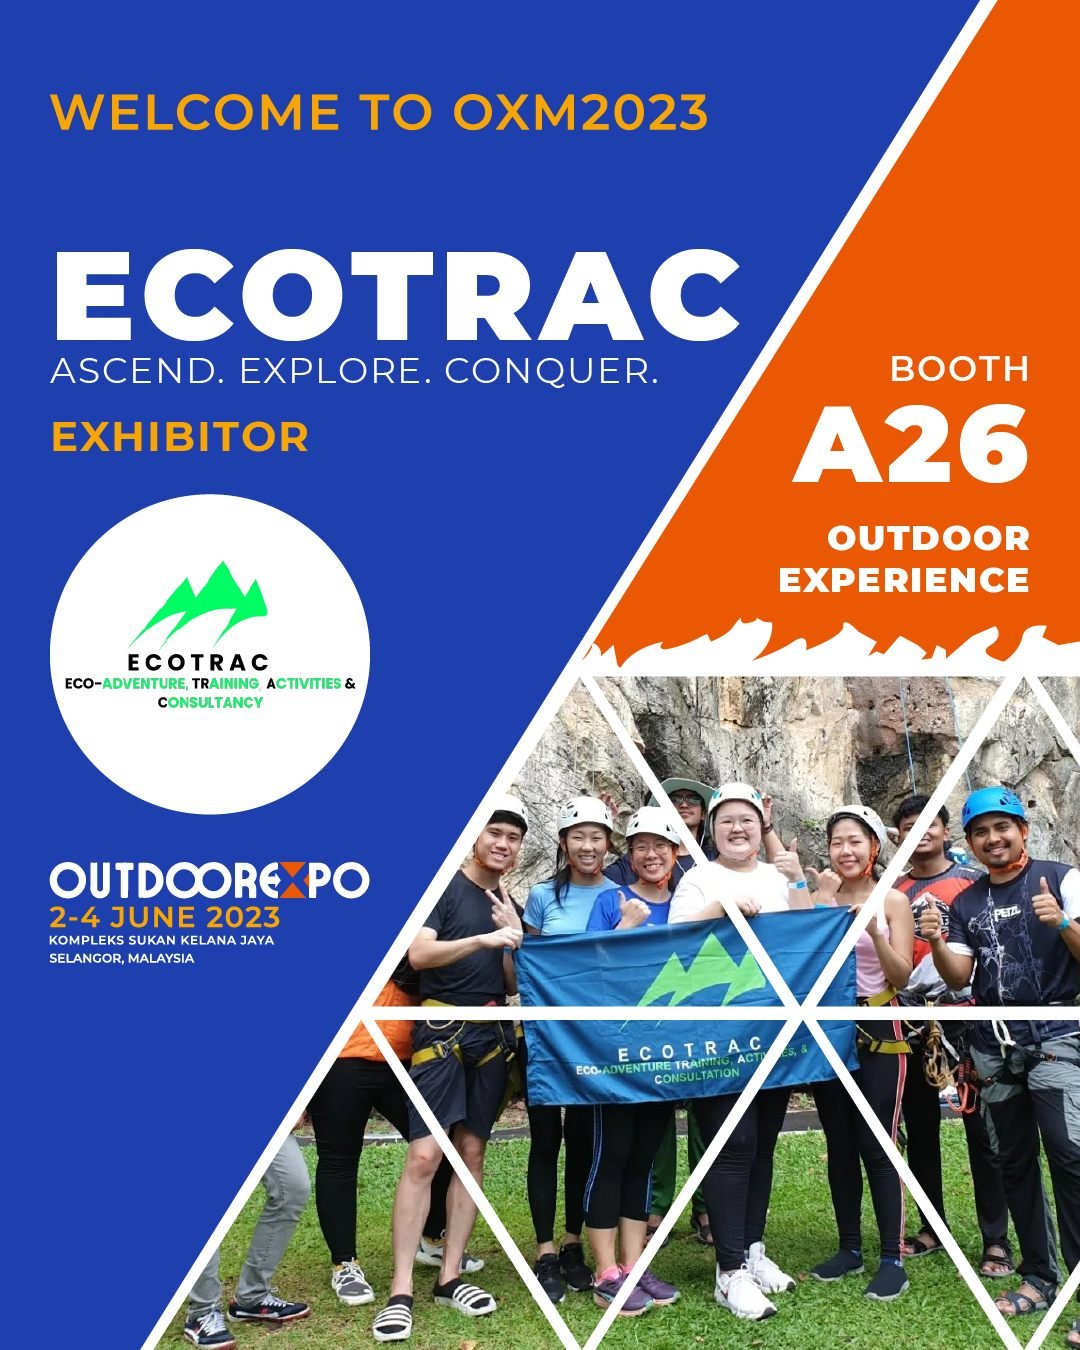 Ecotrac team at Outdoor Expo